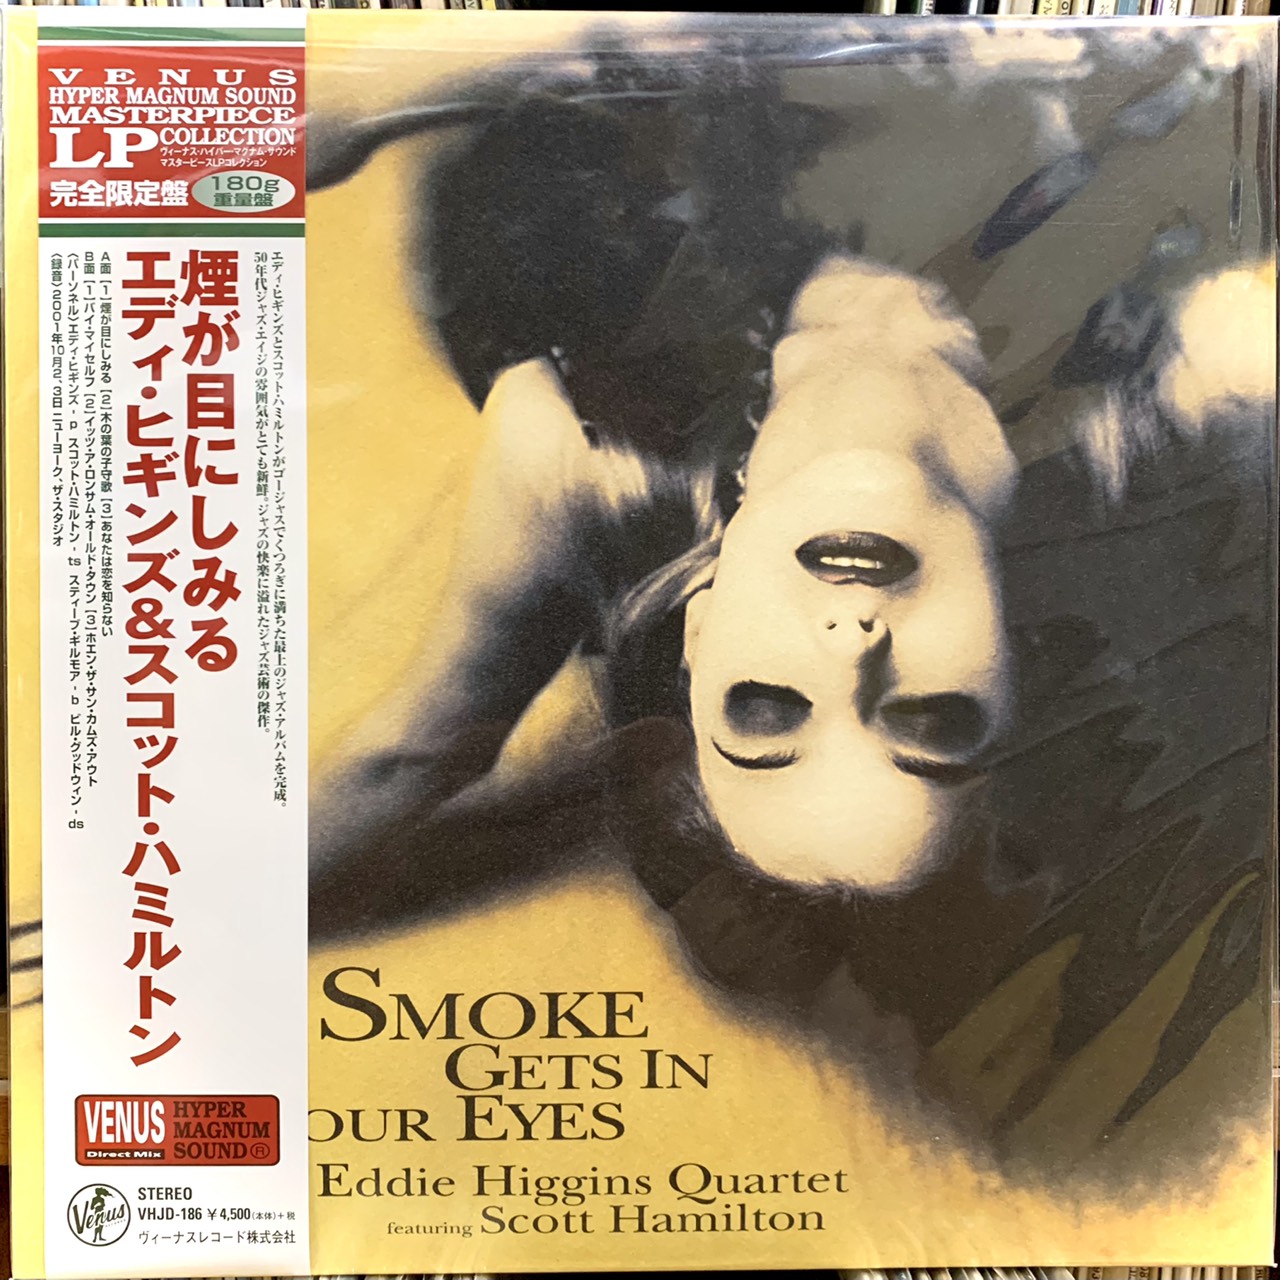 dia-than-vinyl-smoke-gets-in-your-eyes